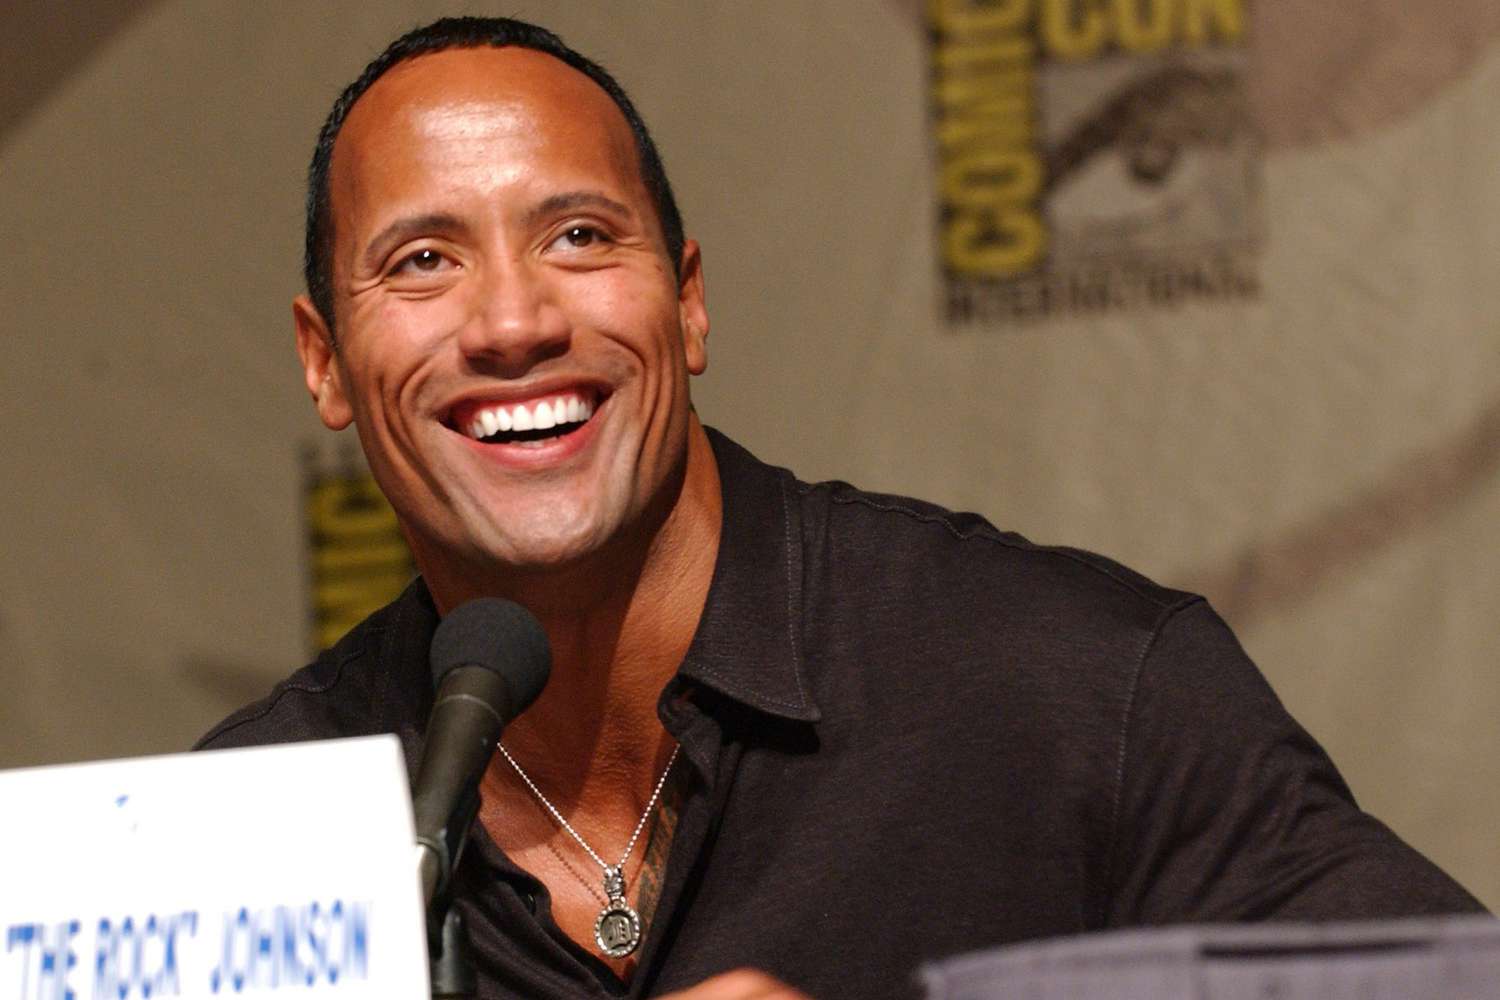 Dwayne 'The Rock' Johnson at the&nbsp;36th Annual Comic-Con International in San Diego&nbsp;on July 17, 2005